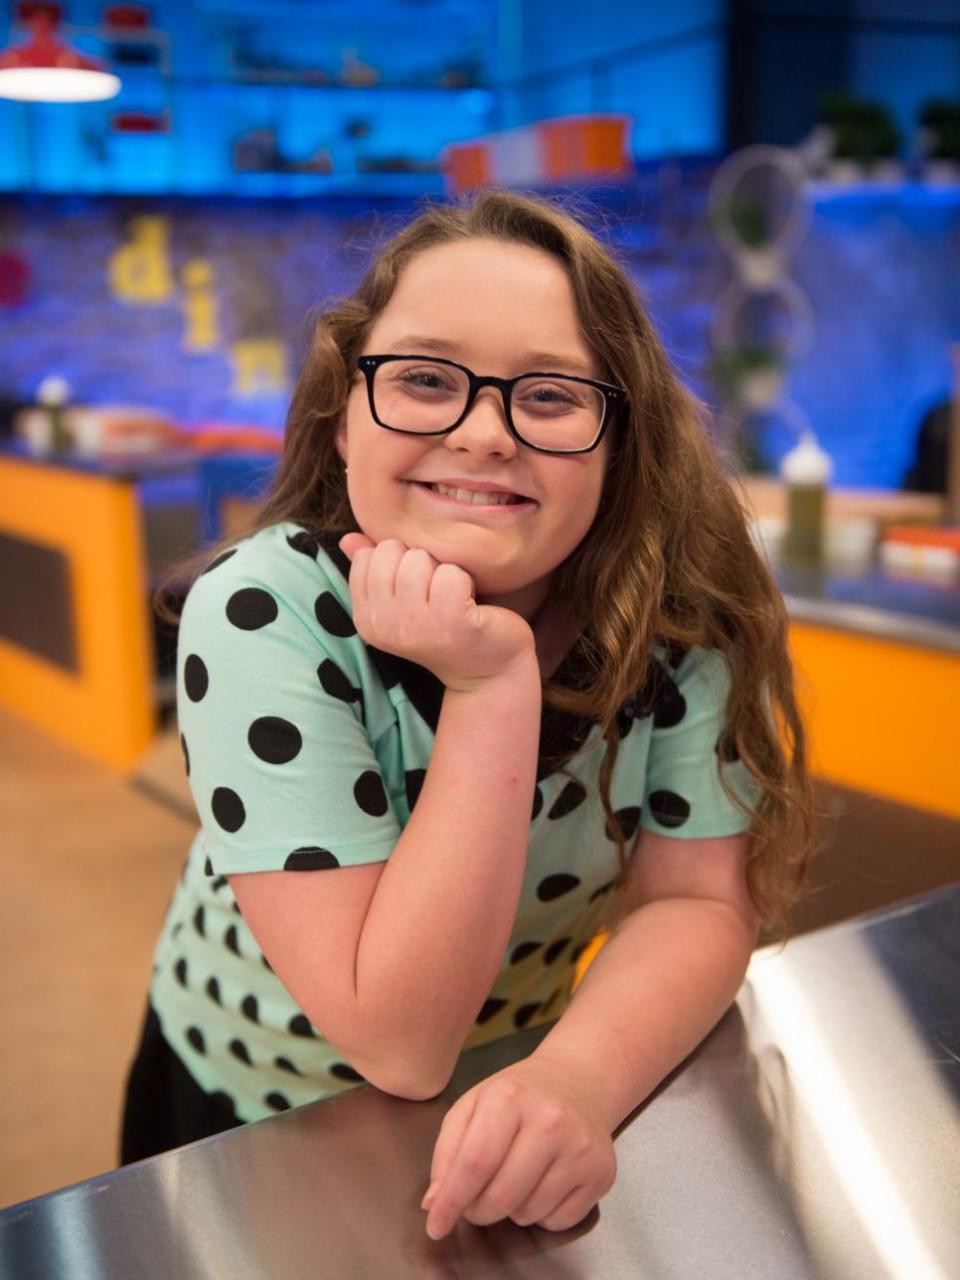 At age 11, Sabrina Richard was a contestant on Food Network's "Rachel Ray's Kids Cook Off" In 2015.